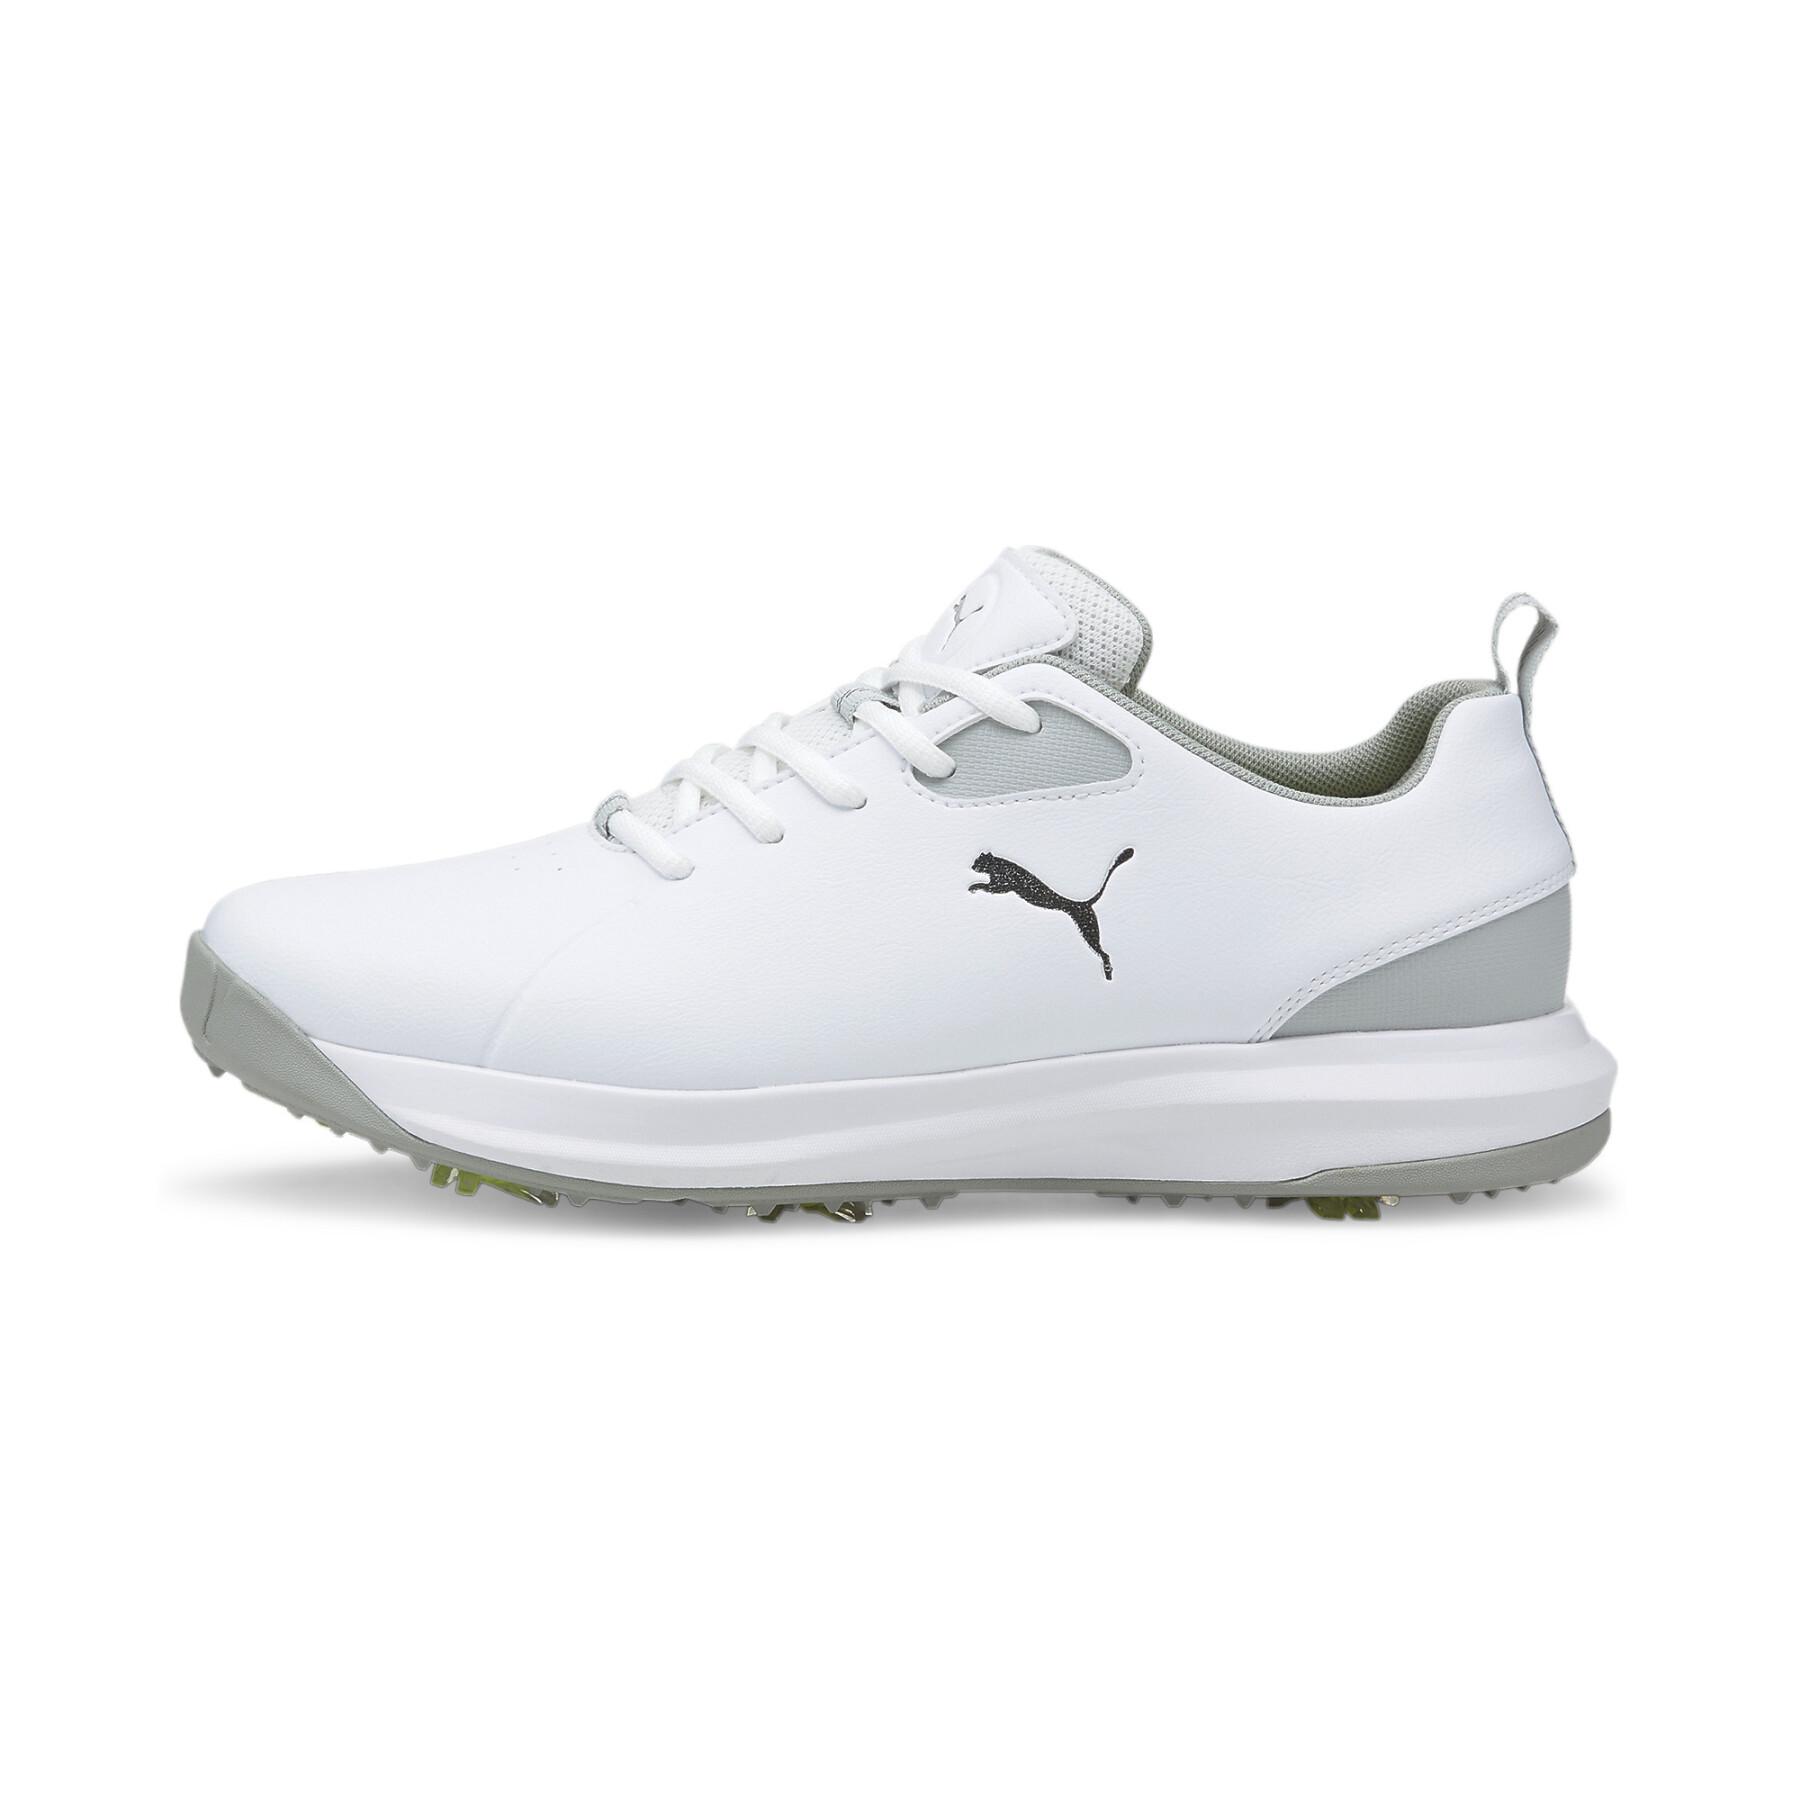 Golf shoes with spikes Puma Fusion FX Tech